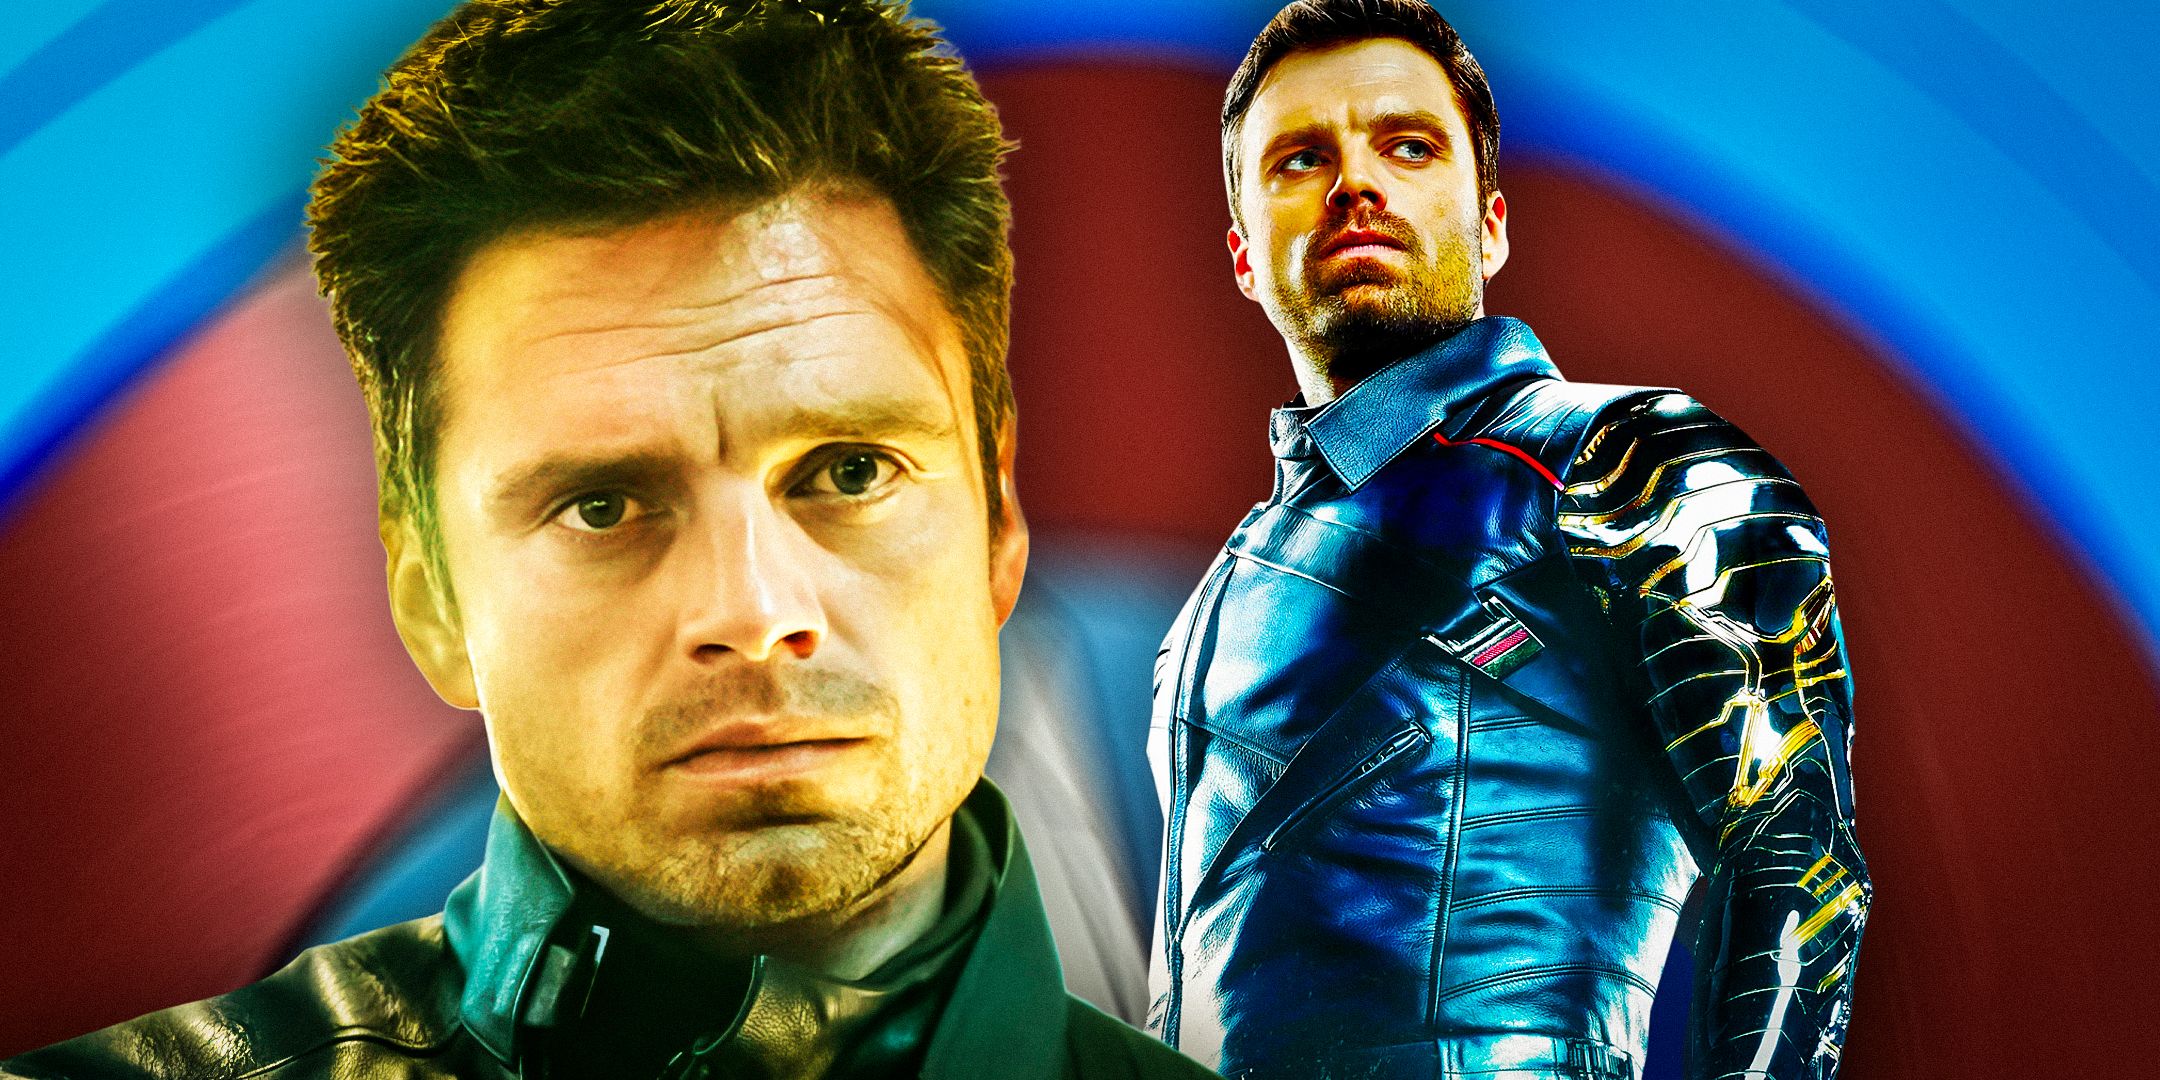 Sebastian Stan Standing as Bucky Barnes a.k.a. the Winter Soldier from the MCU Franchise